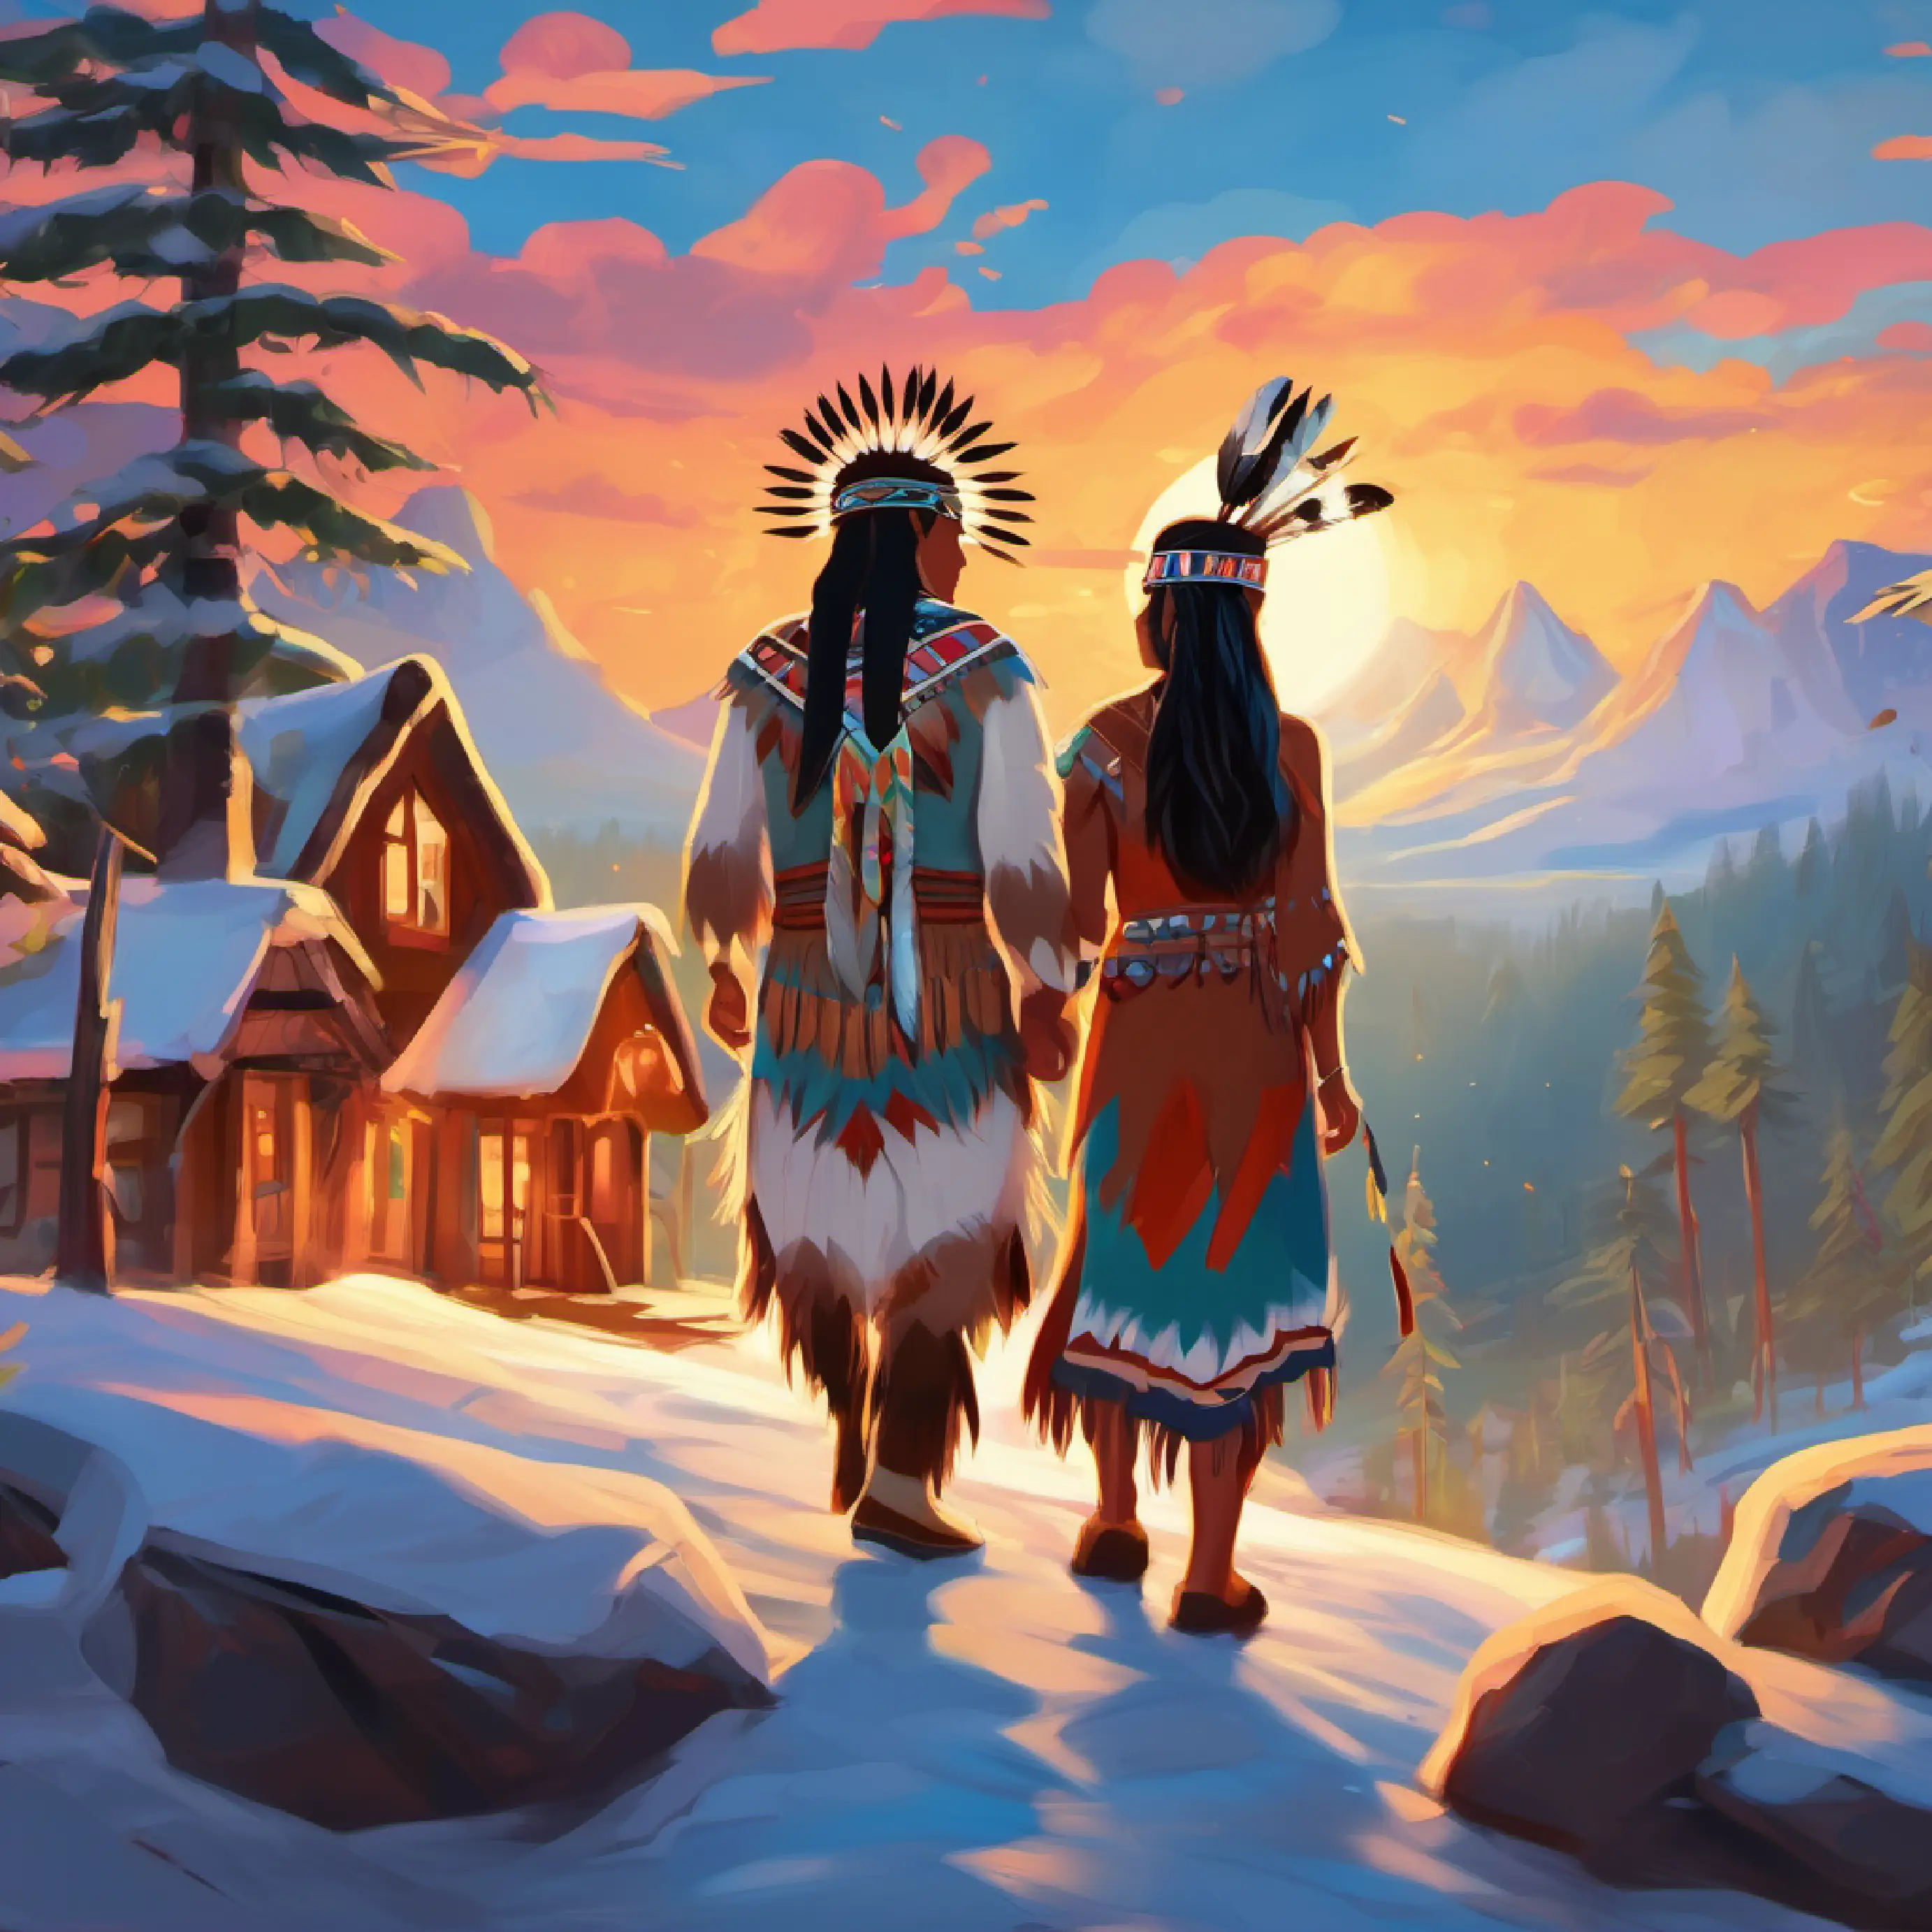 Introducing Two-Spirit people, Native American setting